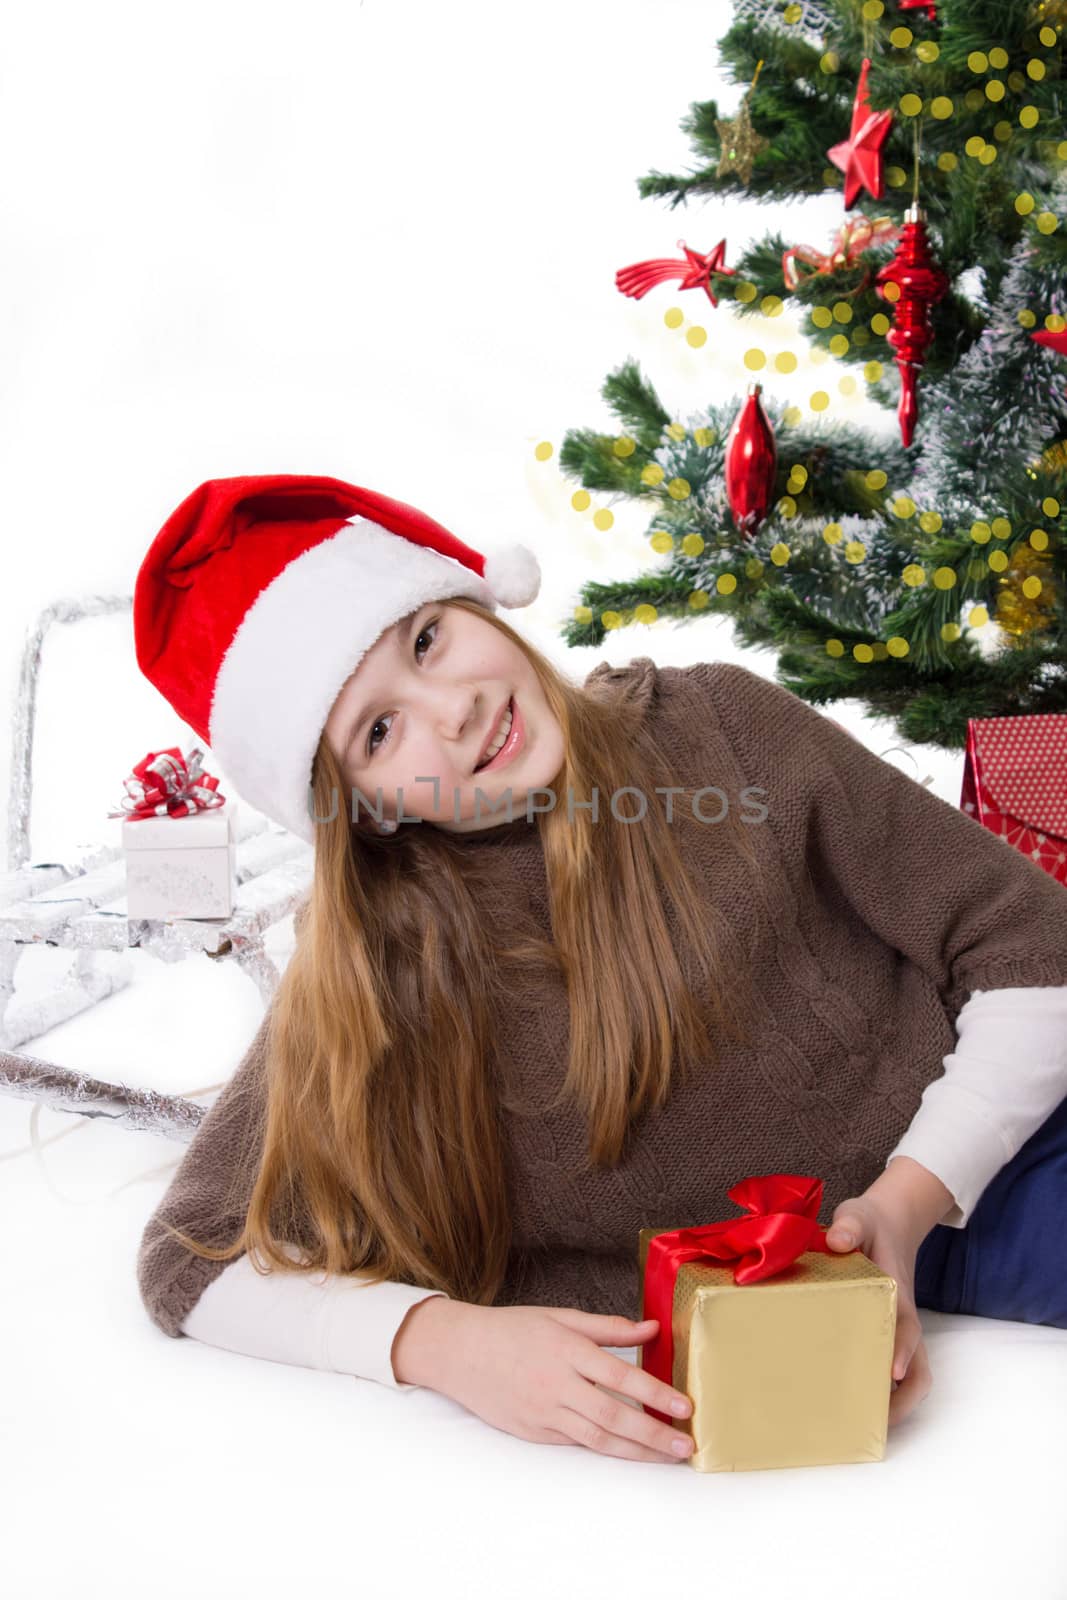 Cute teen girl in Santa hat with gifts under Christmas tree